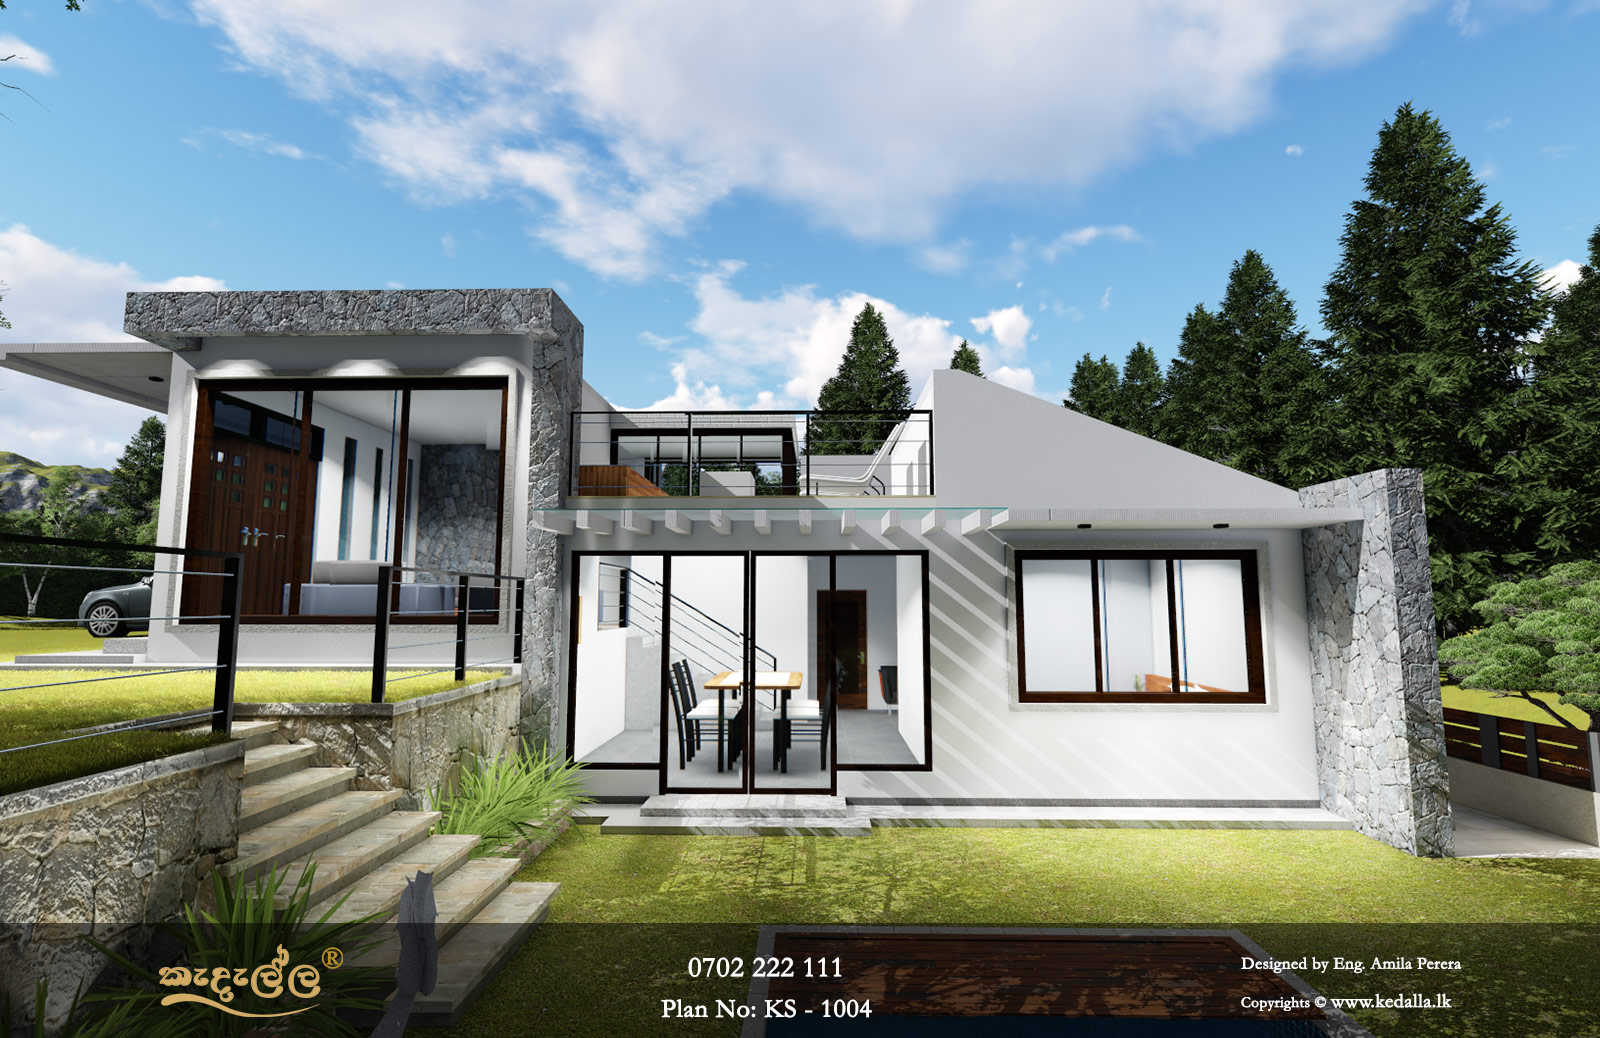 A single storey house design which can be configured to suit blocks slightly wider or narrower. The floor plan has been designed with functional living in mind